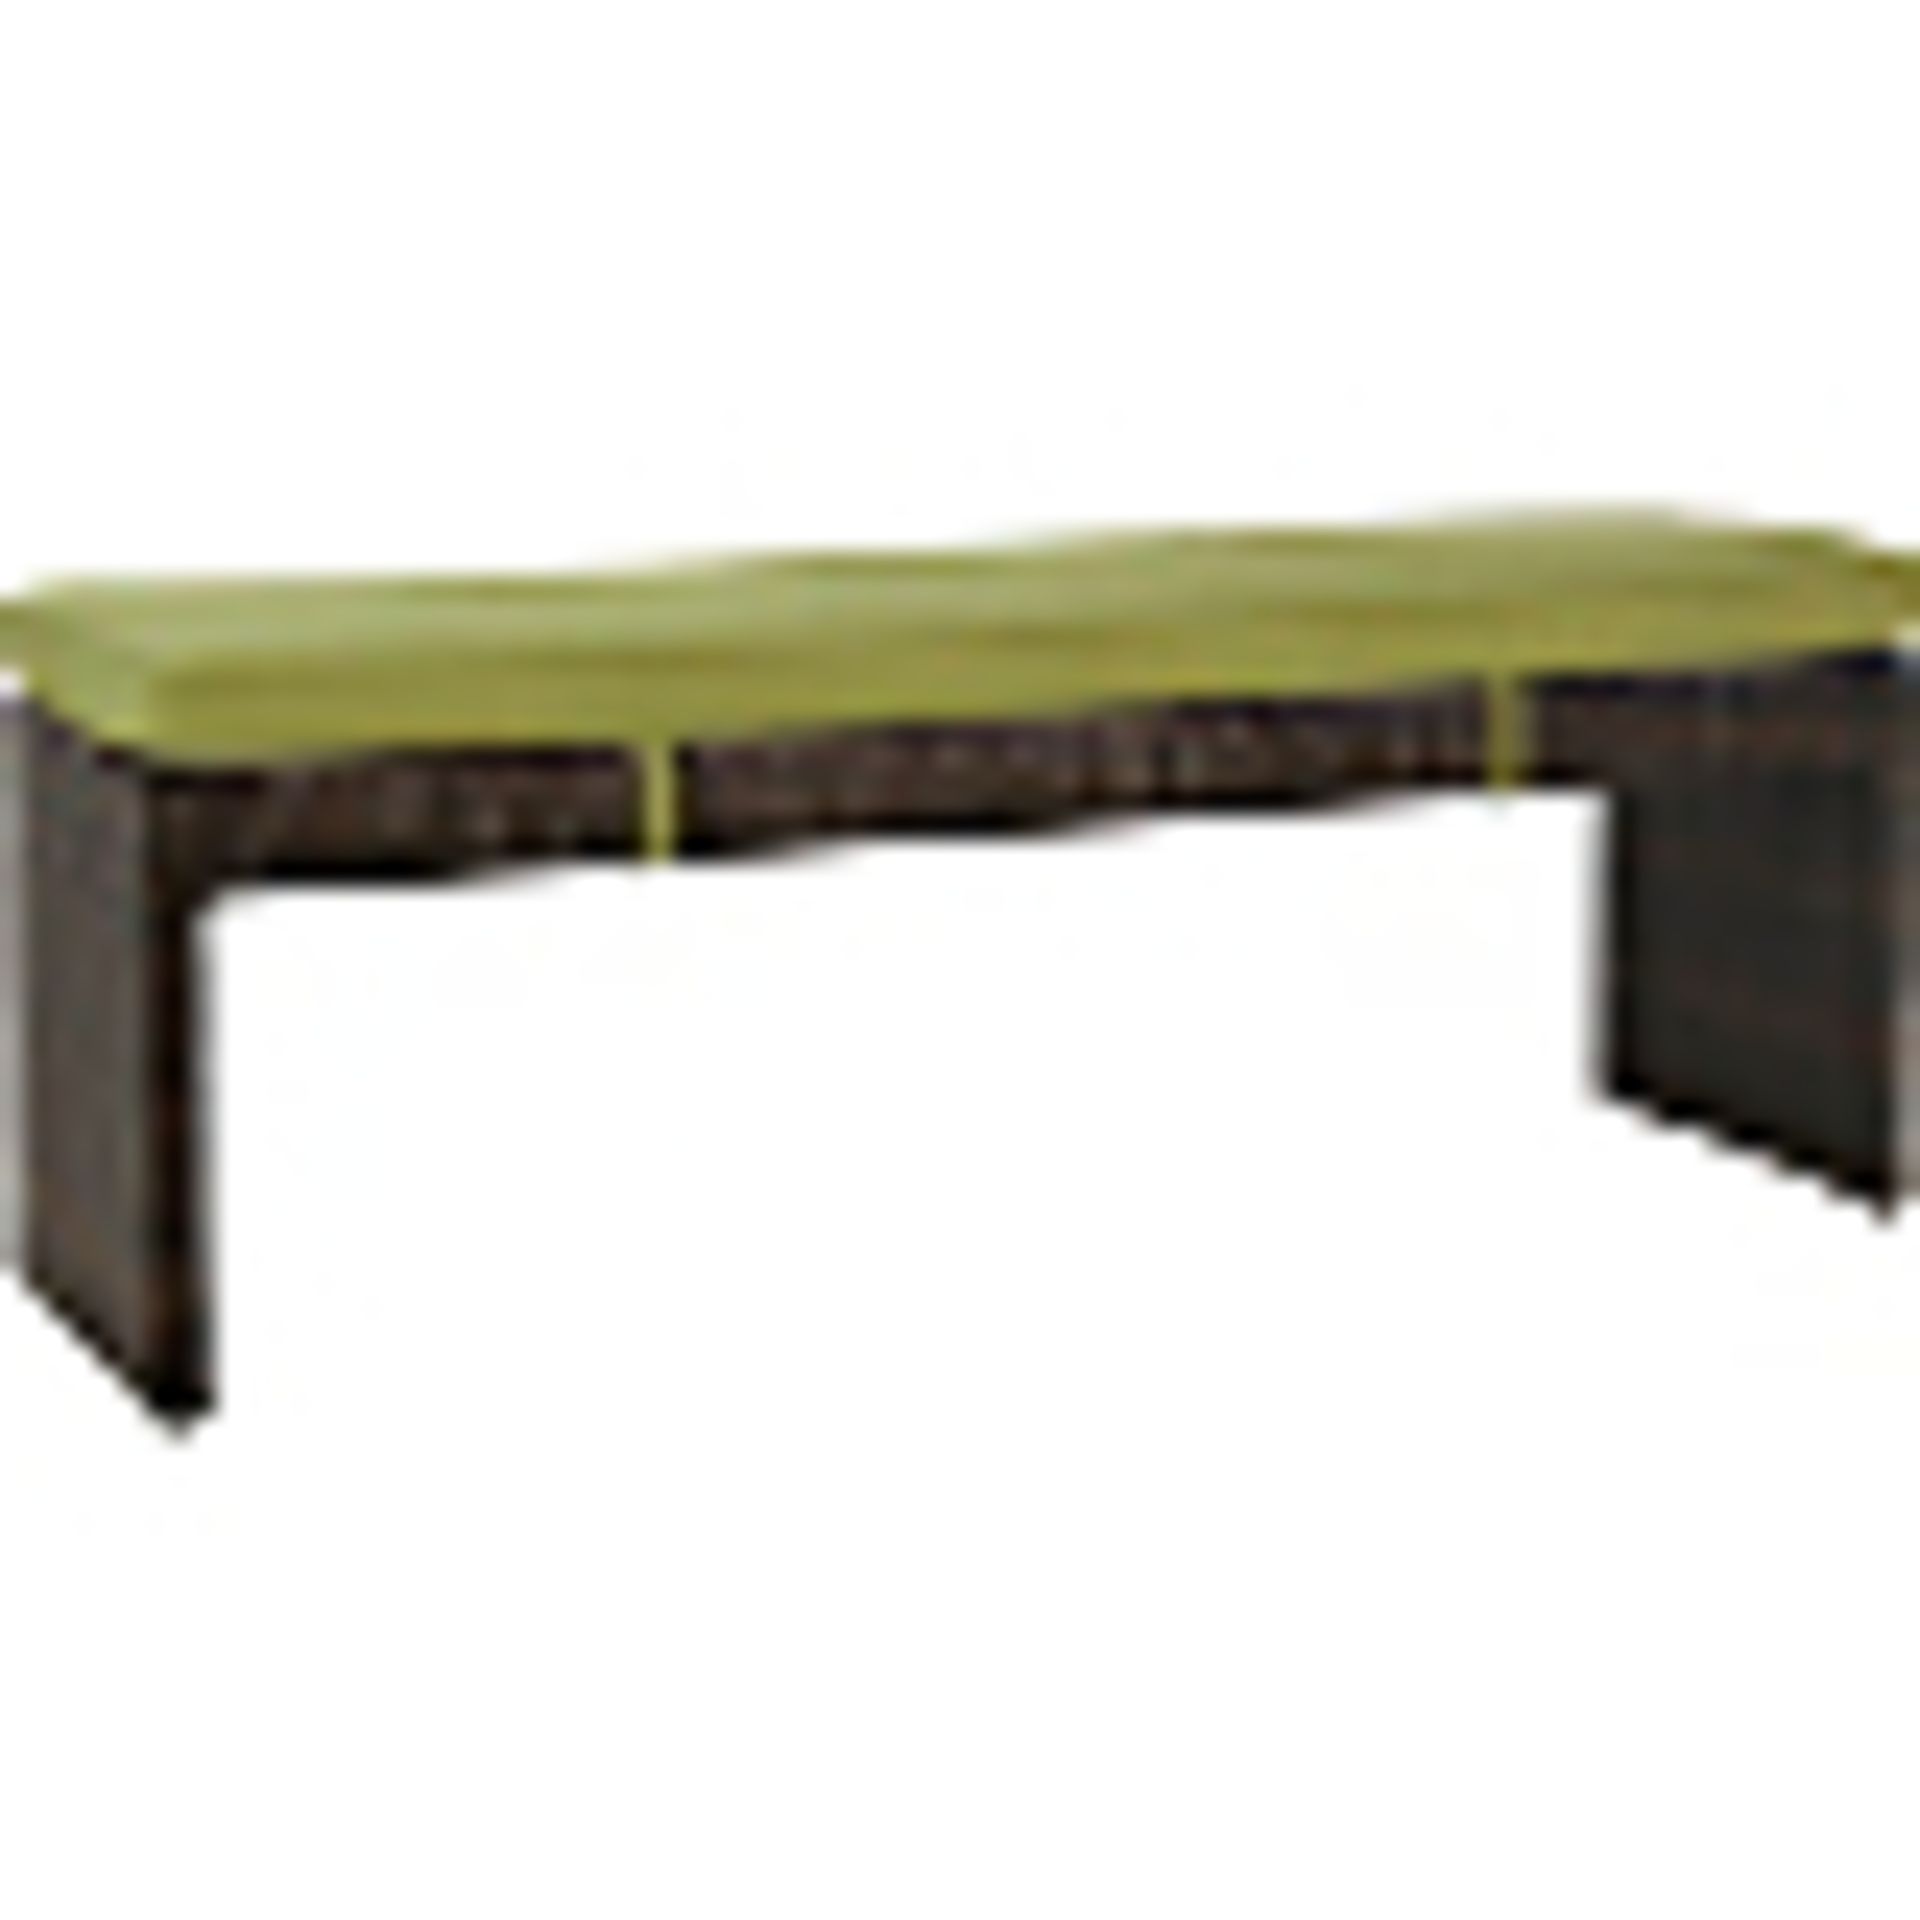 Jakarta 3pc deluxe bench dining set, olive green colour. New and boxed. See picture for design. - Image 3 of 7